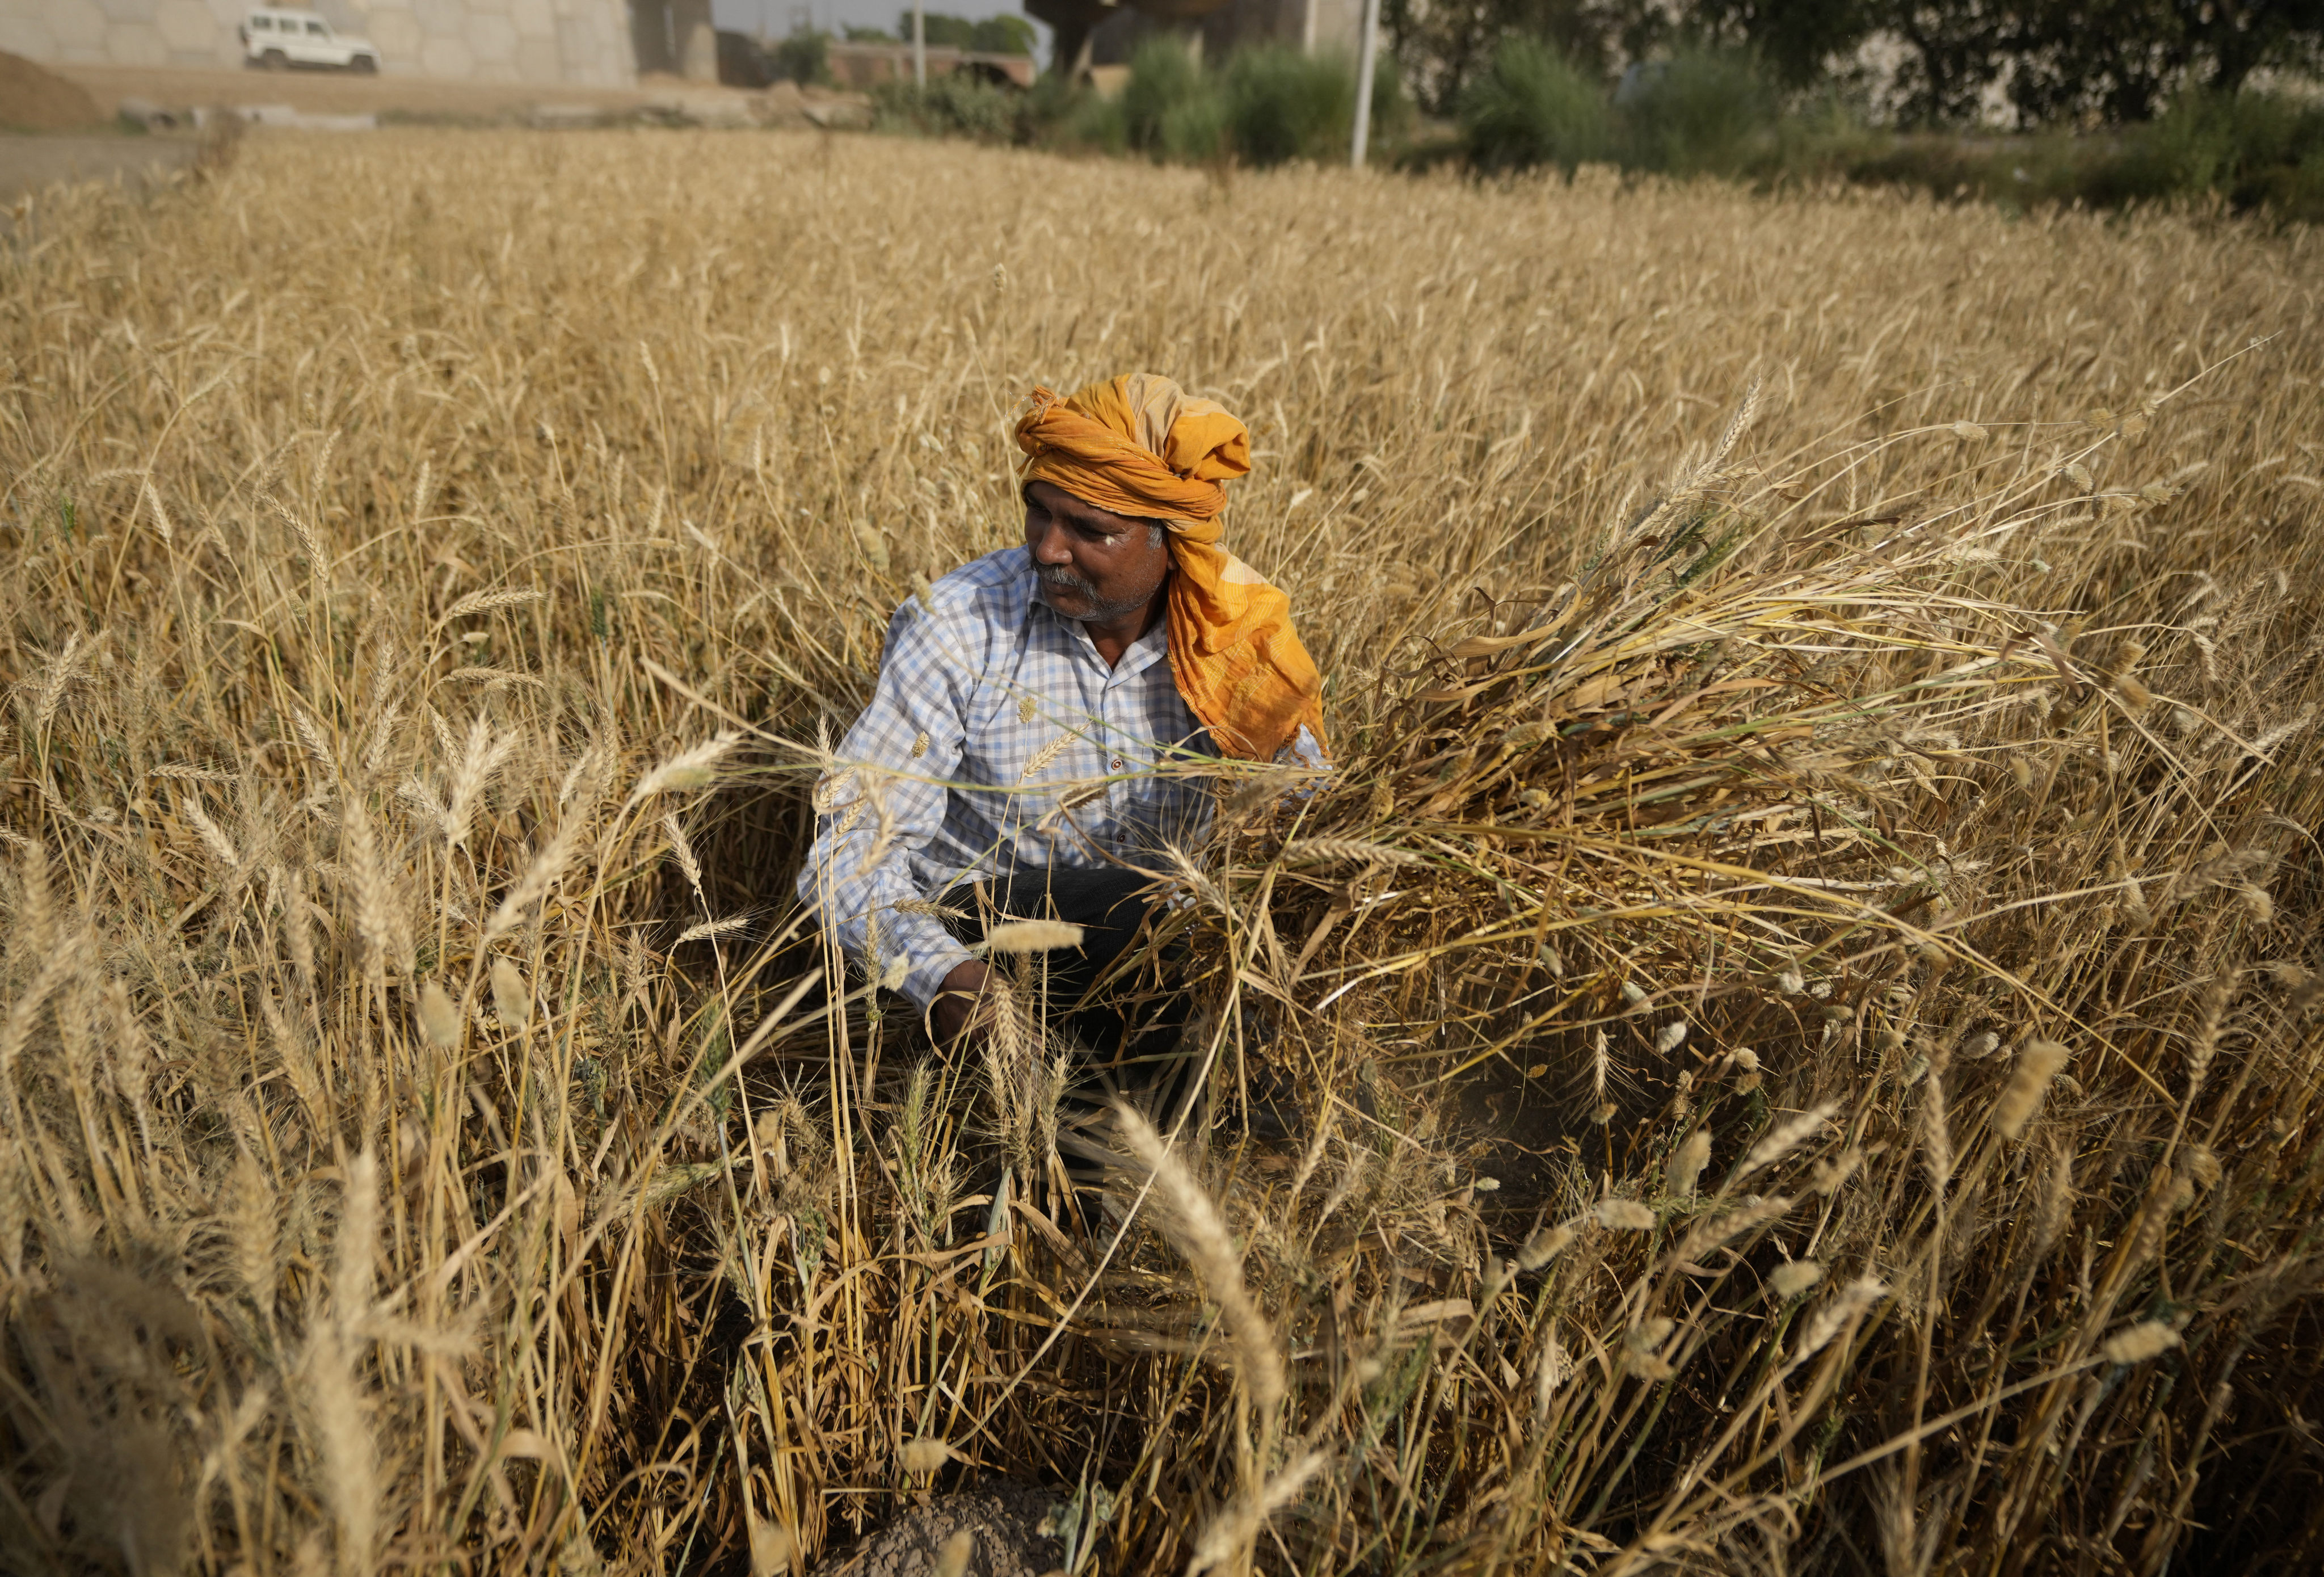 A farmer harvests wheat on the outskirts of Jammu, India. India has recently announced a ban on wheat exports, which is likely to fuel further price increases in the global market. Photo: AP